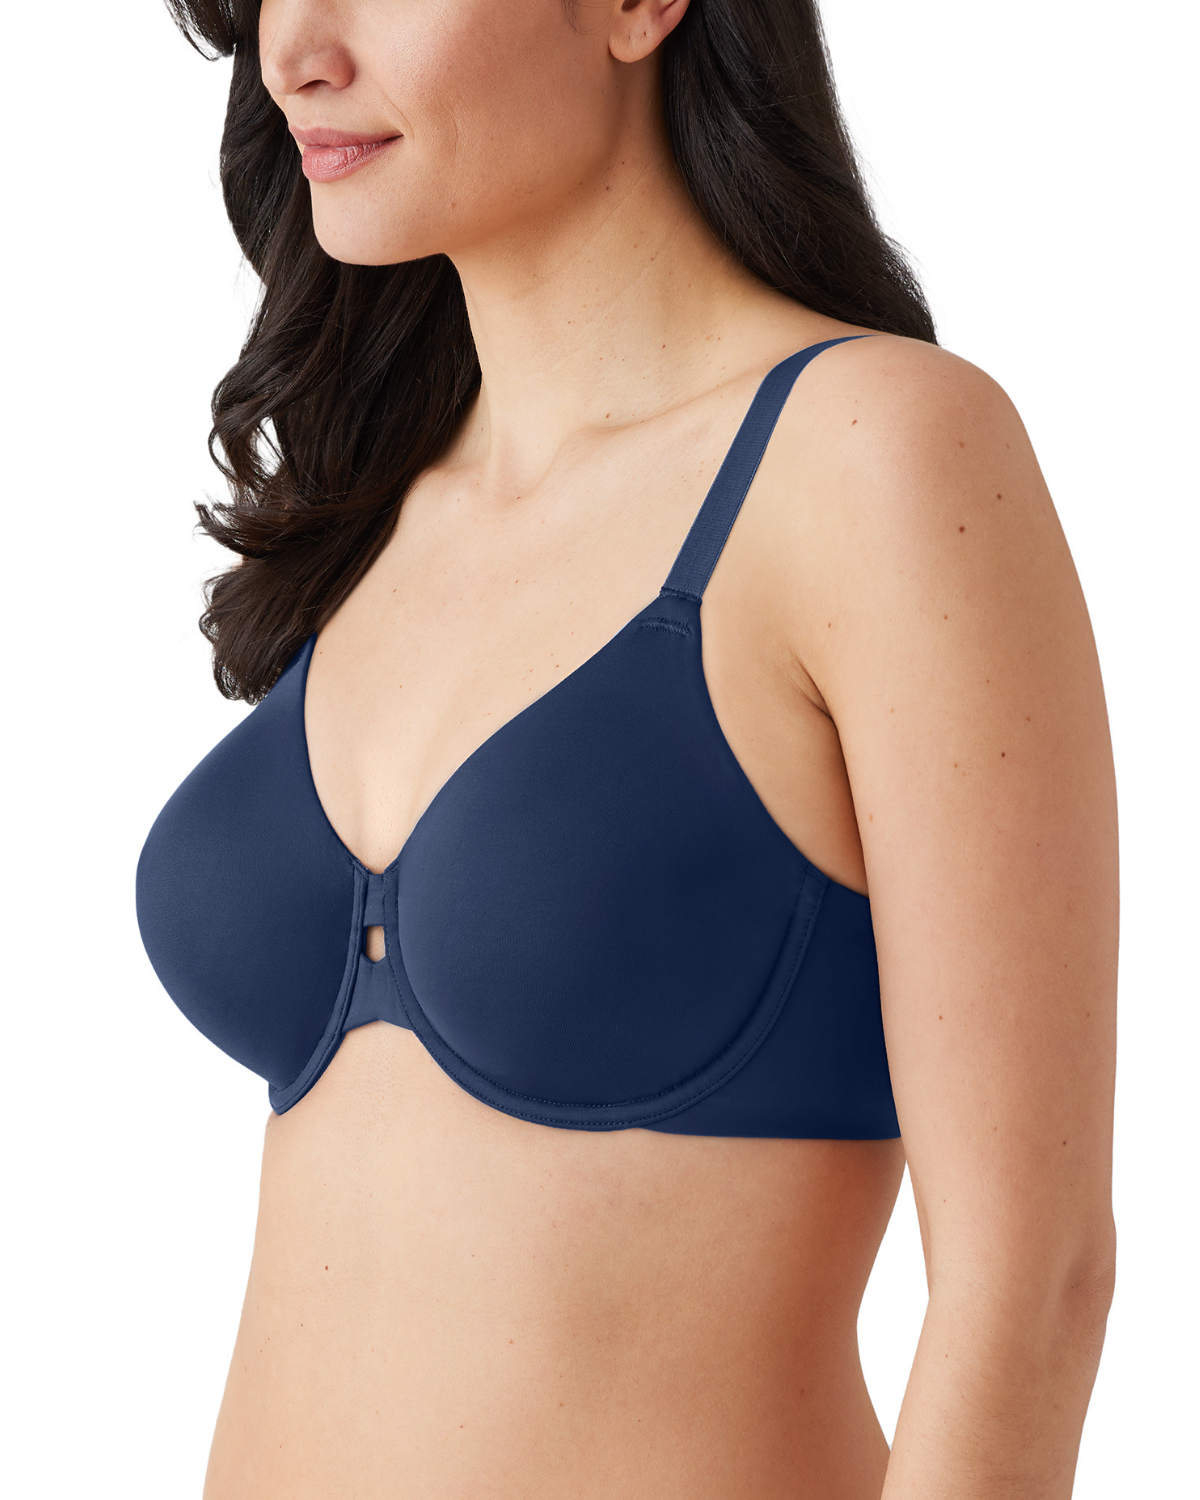 Model wearing an smooth t-shirt underwire bra with a convertible racerback in navy